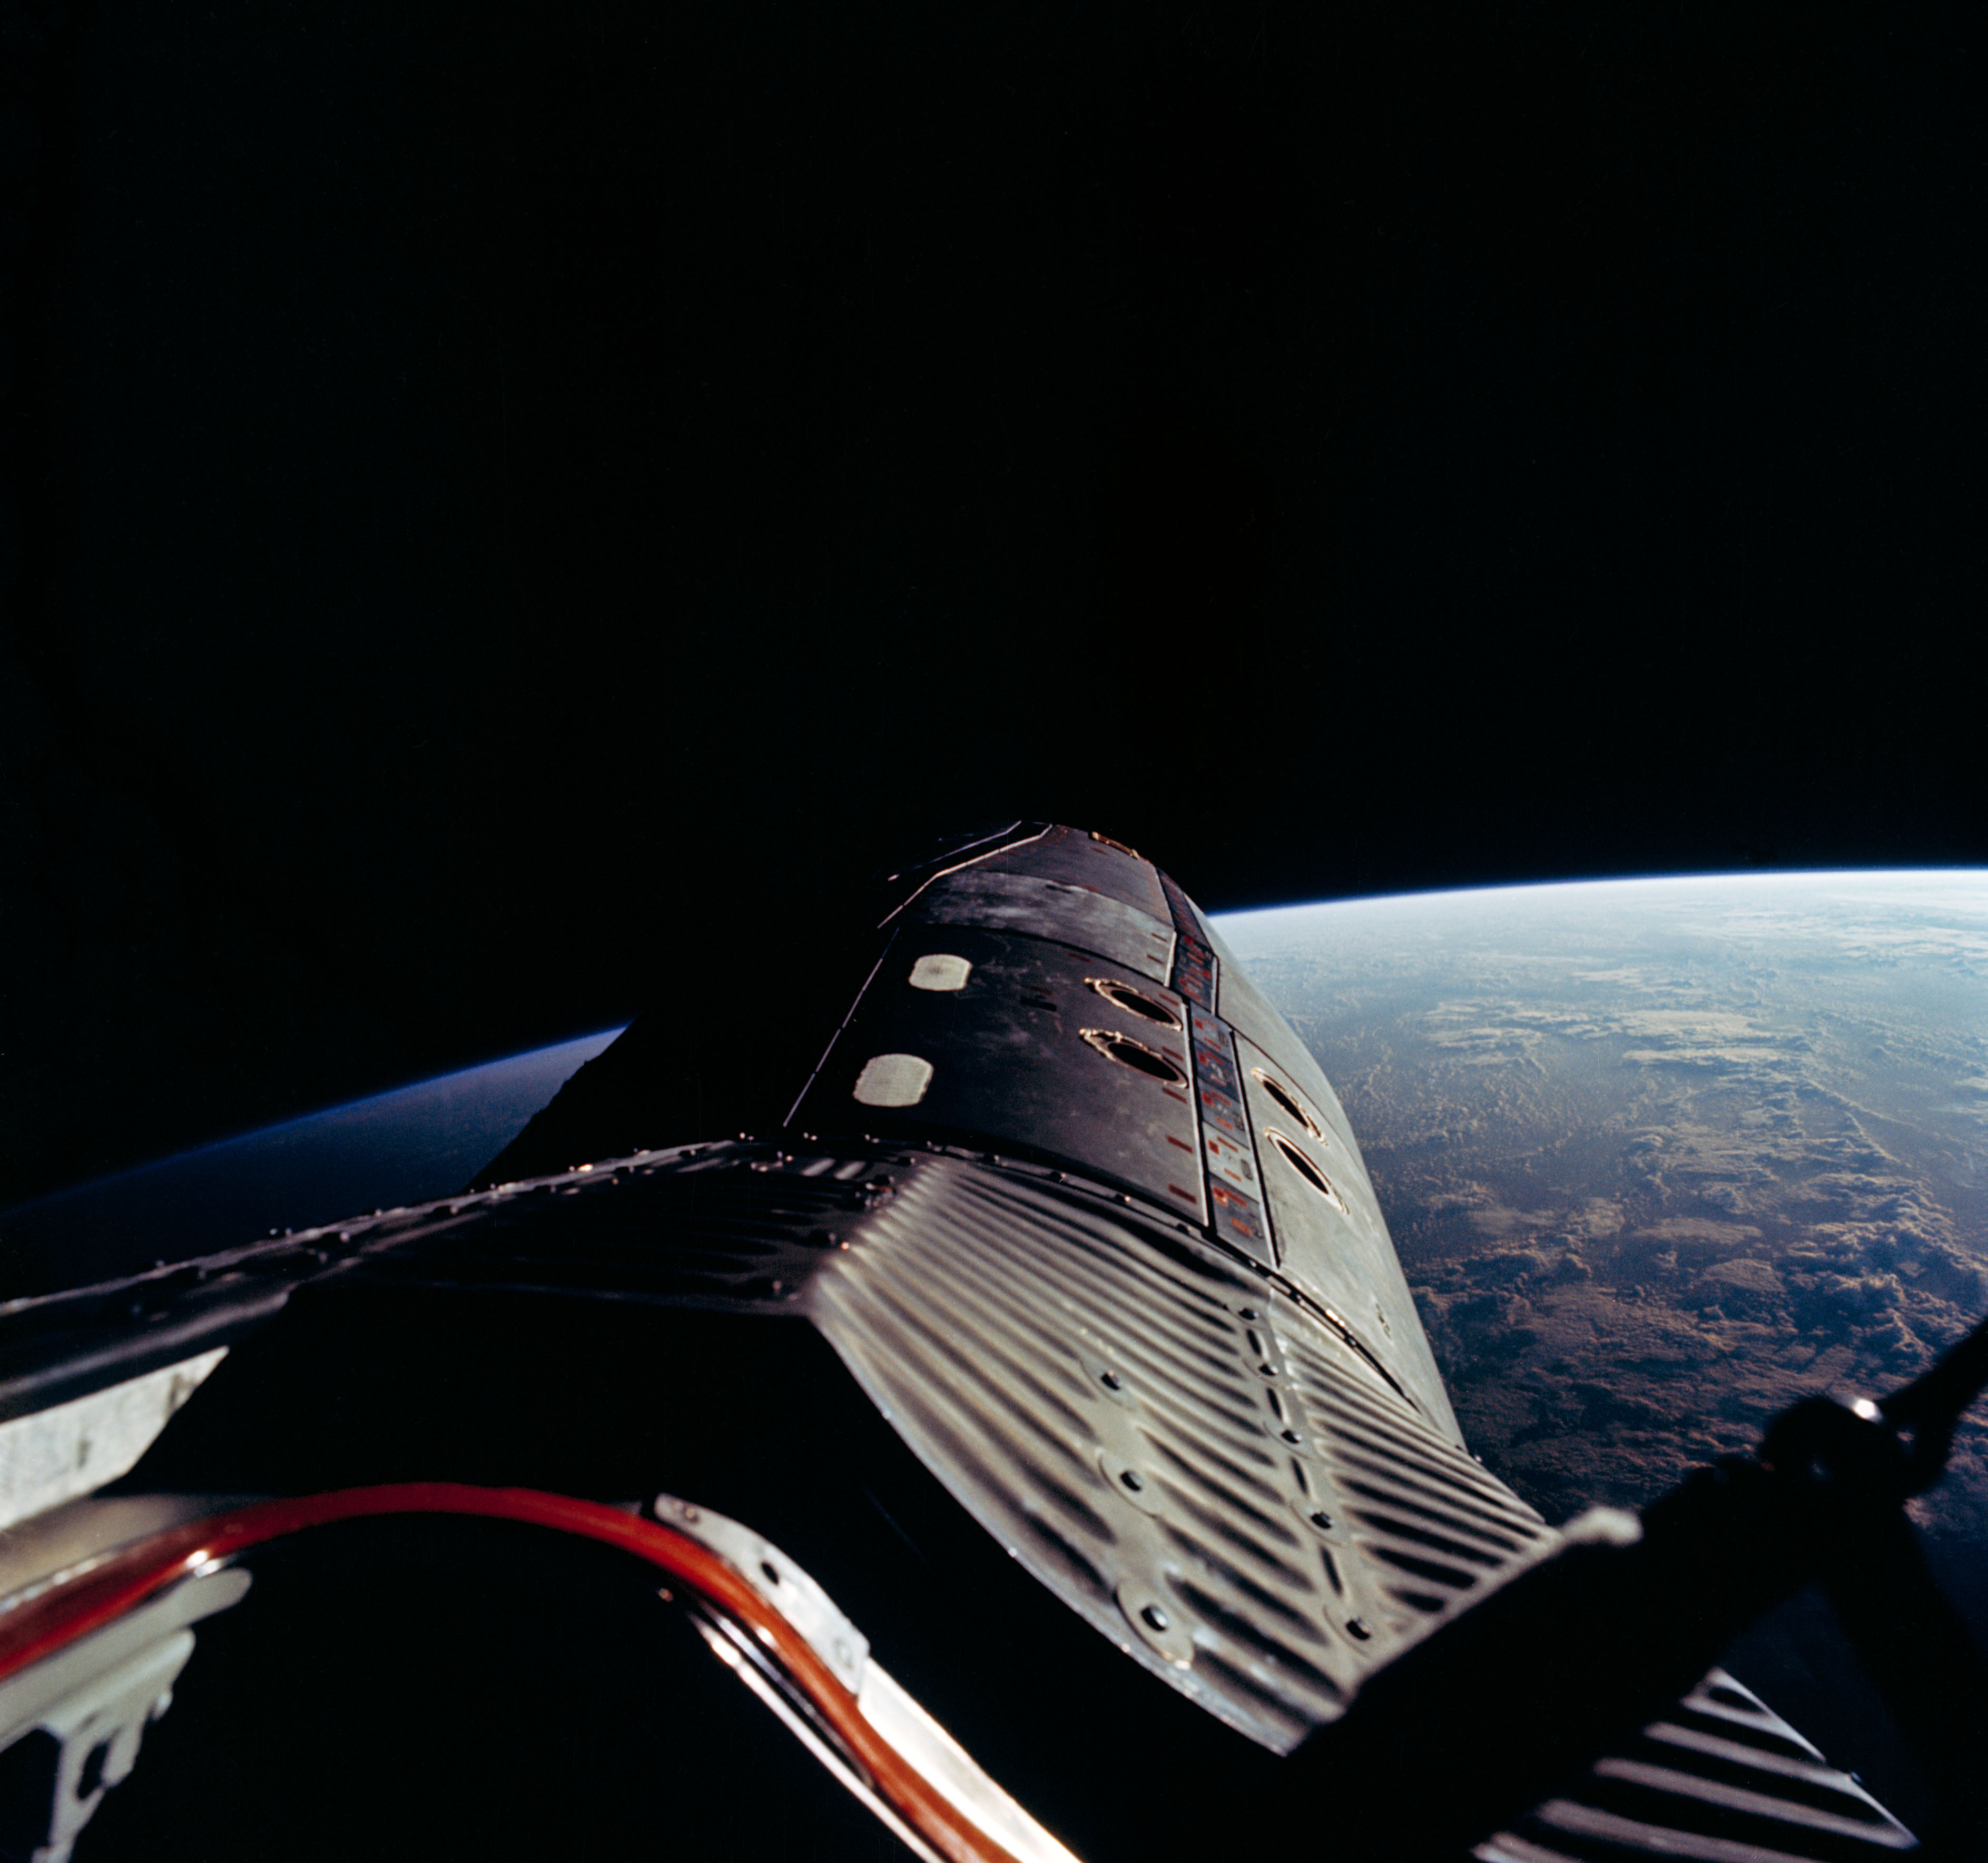 The nose of Gemini XII and the grandeur of Earth, as captured by Buzz Aldrin during one of his sessions of EVA. Photo Credit: NASA